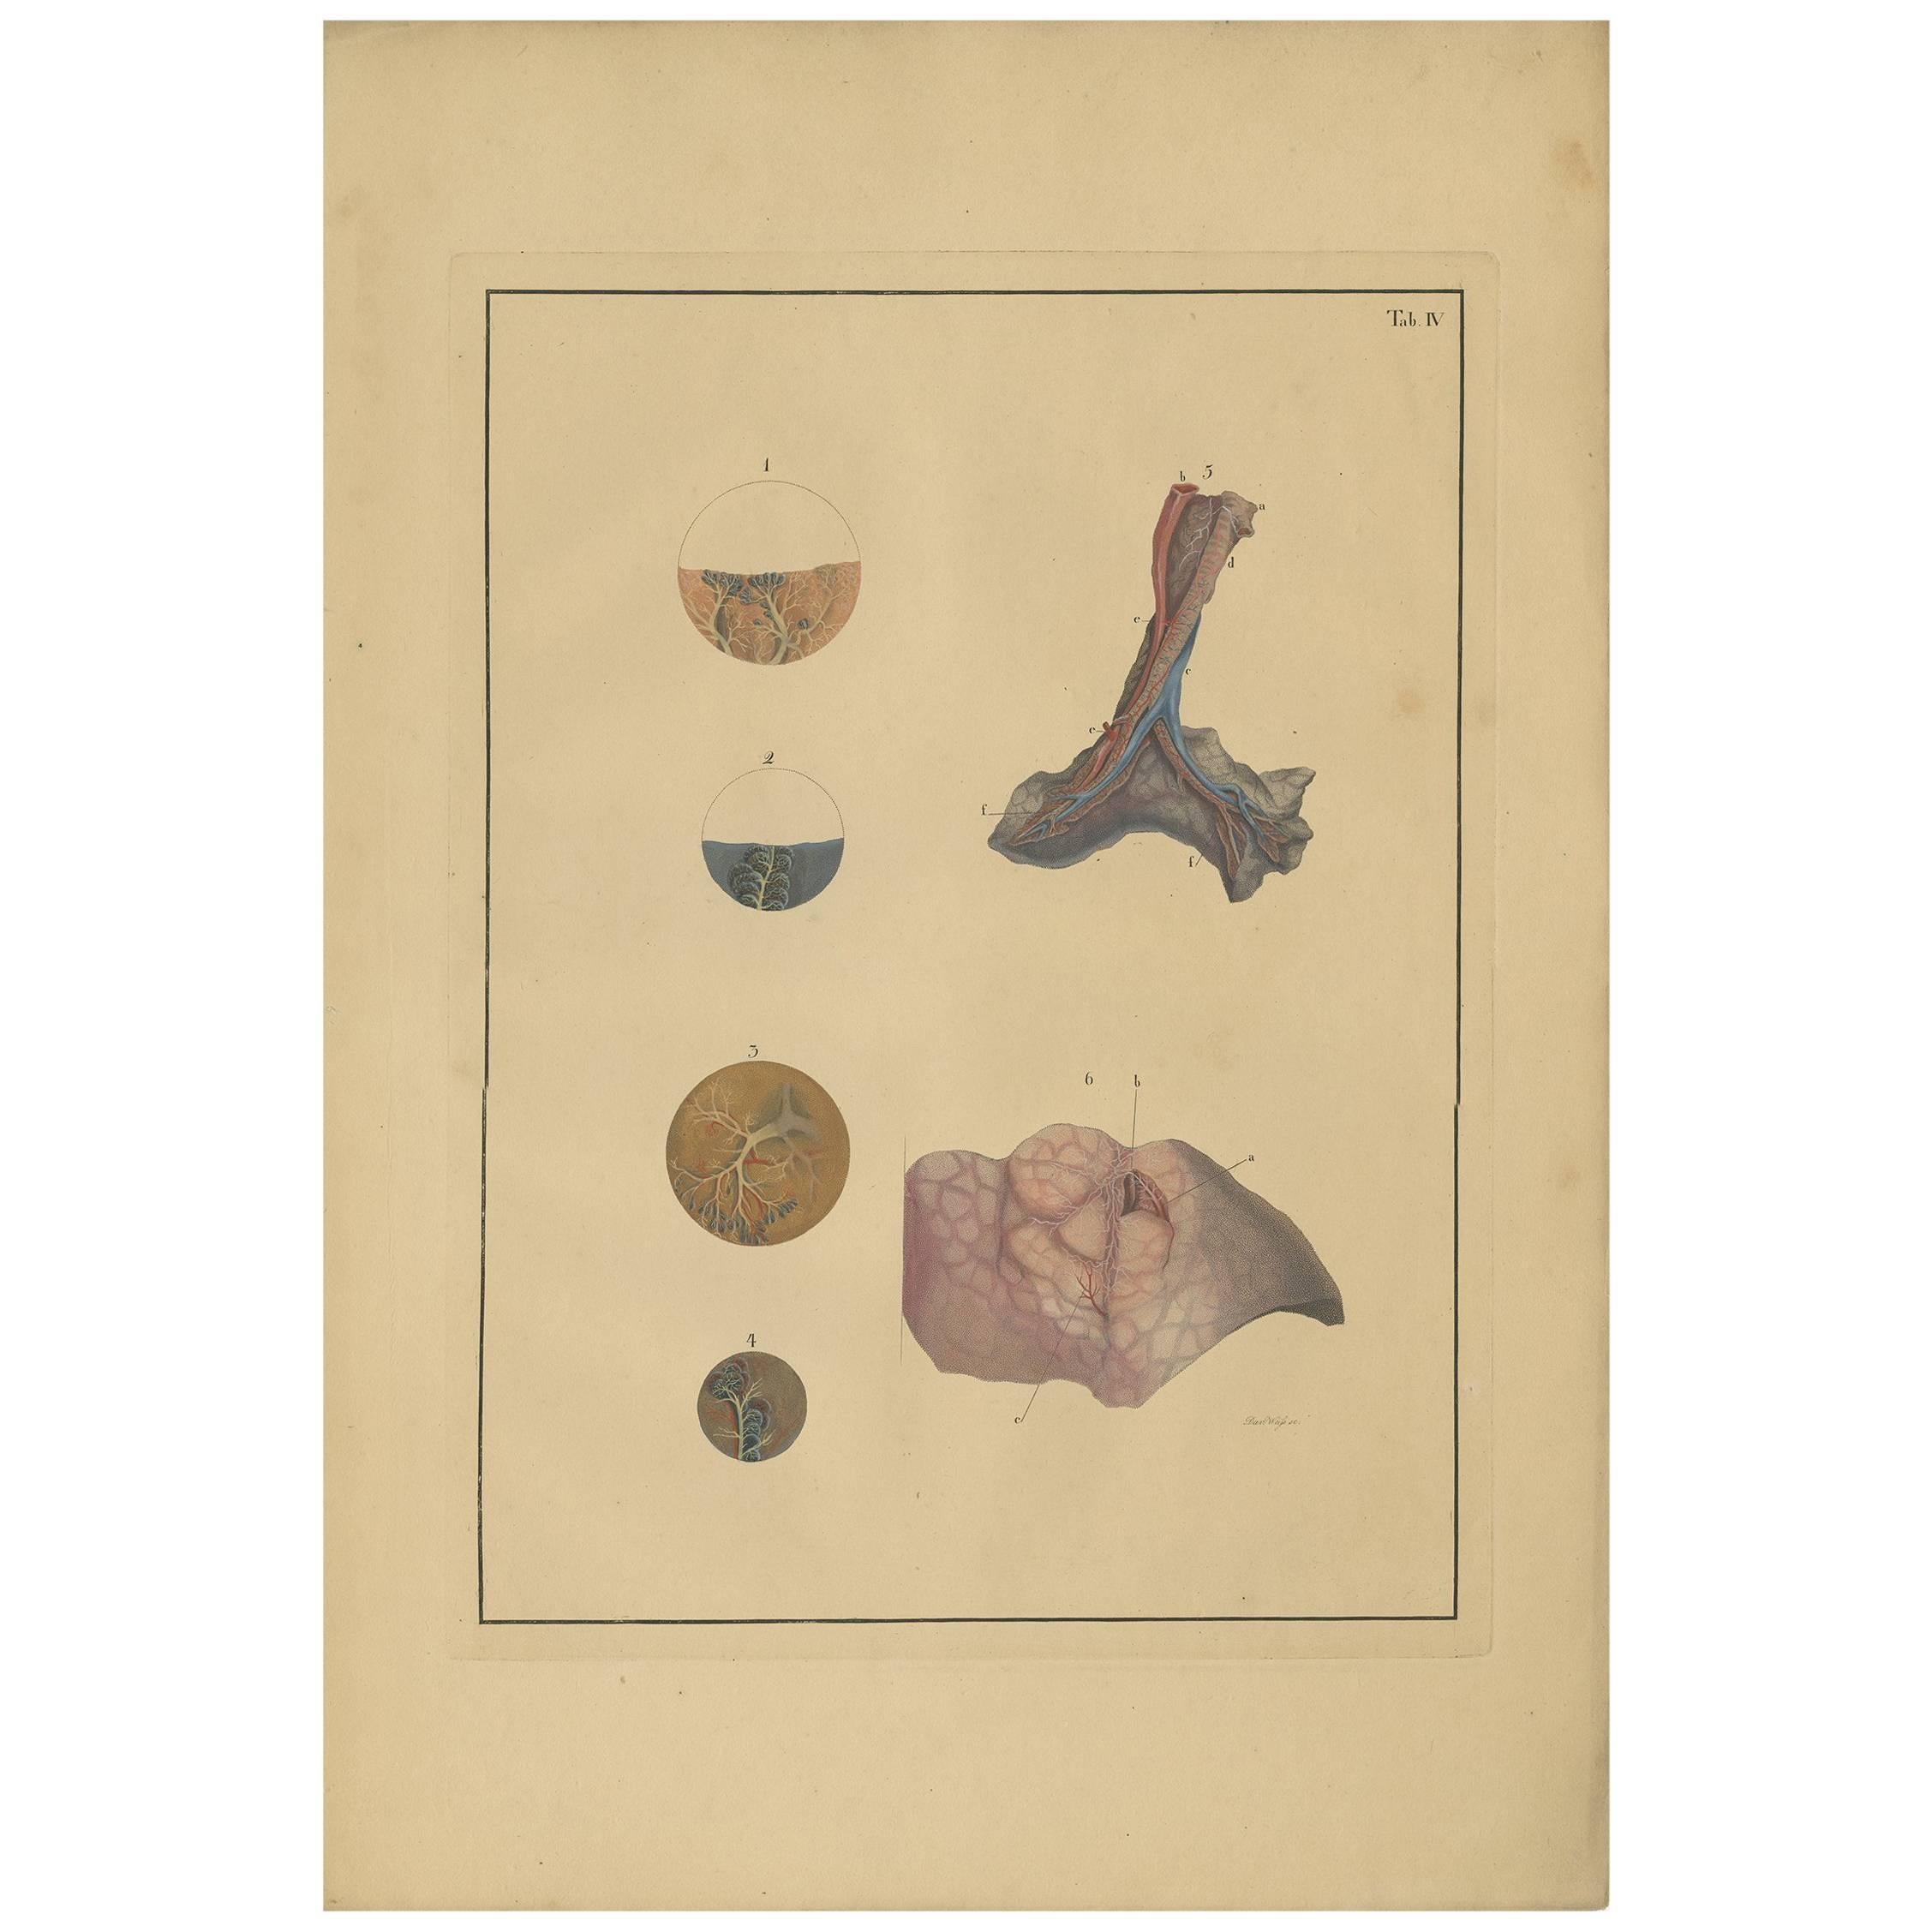 Antique Medical Print of Lungs 'Tab.4' by F.D. Reisseisen, 1822 For Sale